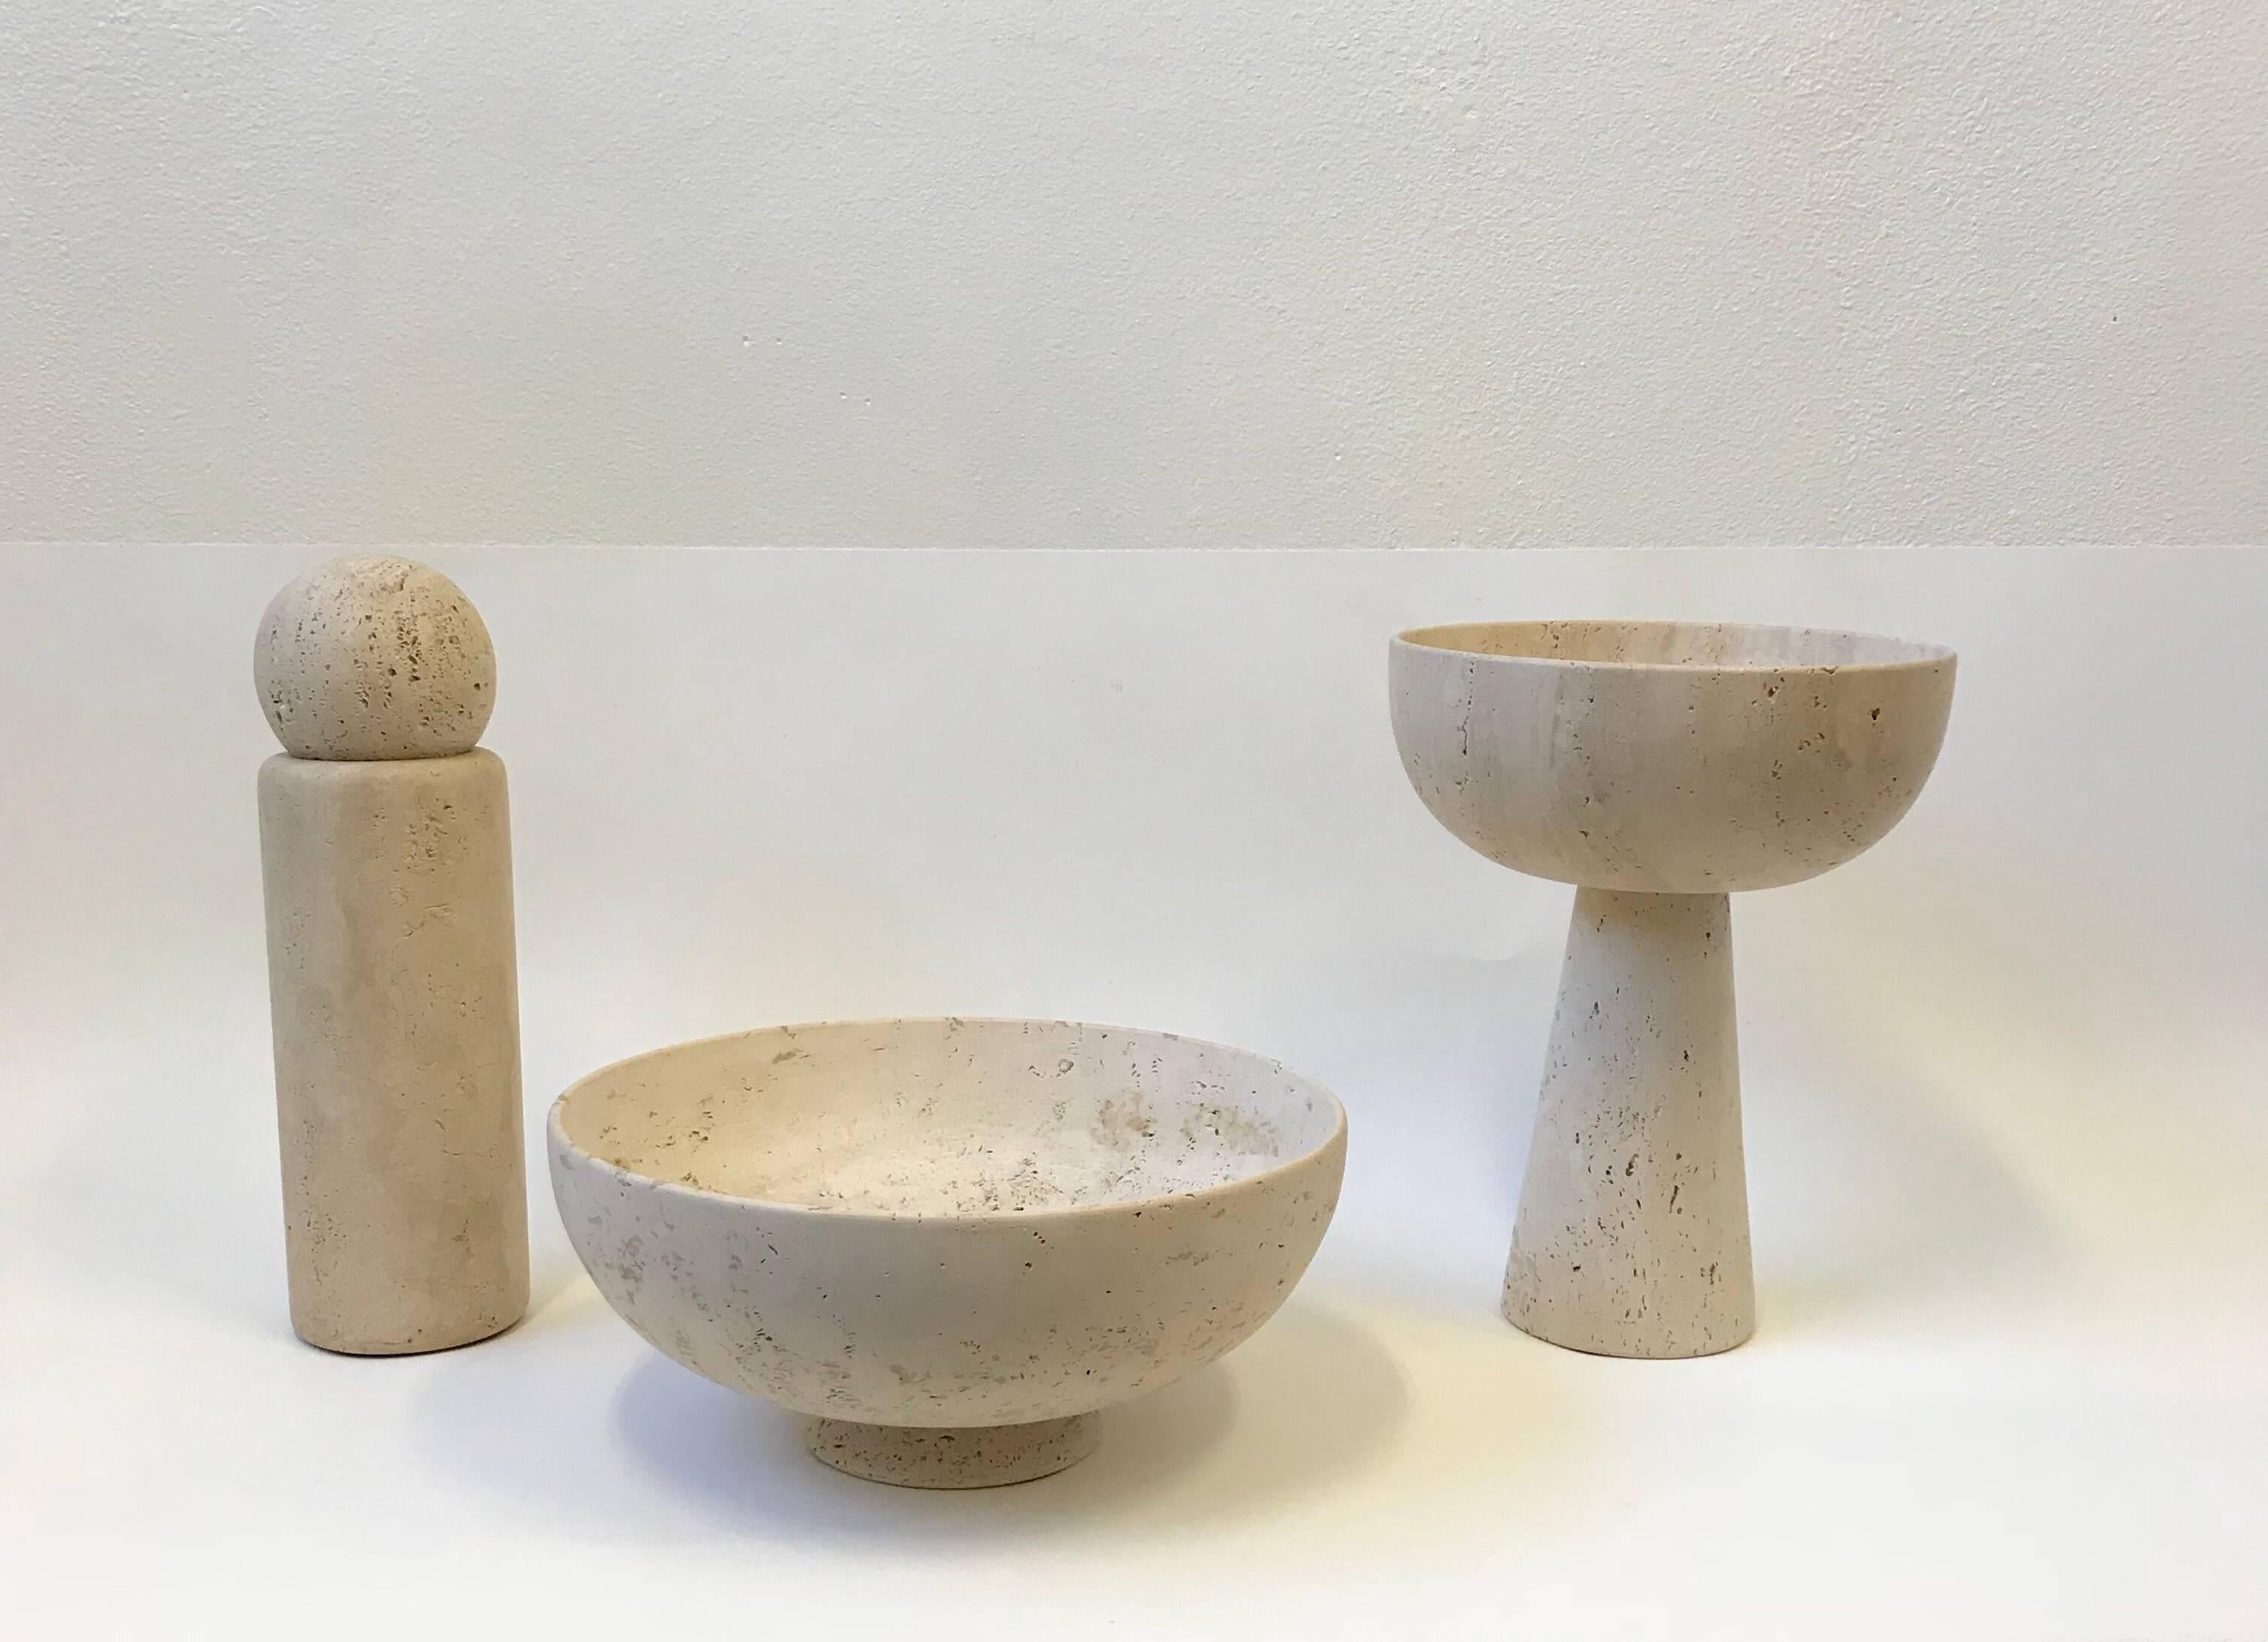 A spectacular 1970s set of three solid raw Italian travertine sculpted Architectural bowls by Raymor. Since they are solid travertine, they are heavy. This can be used indoor or outdoor. 

Dimensions:
Tallest bowl - 17.75” high 13.5”